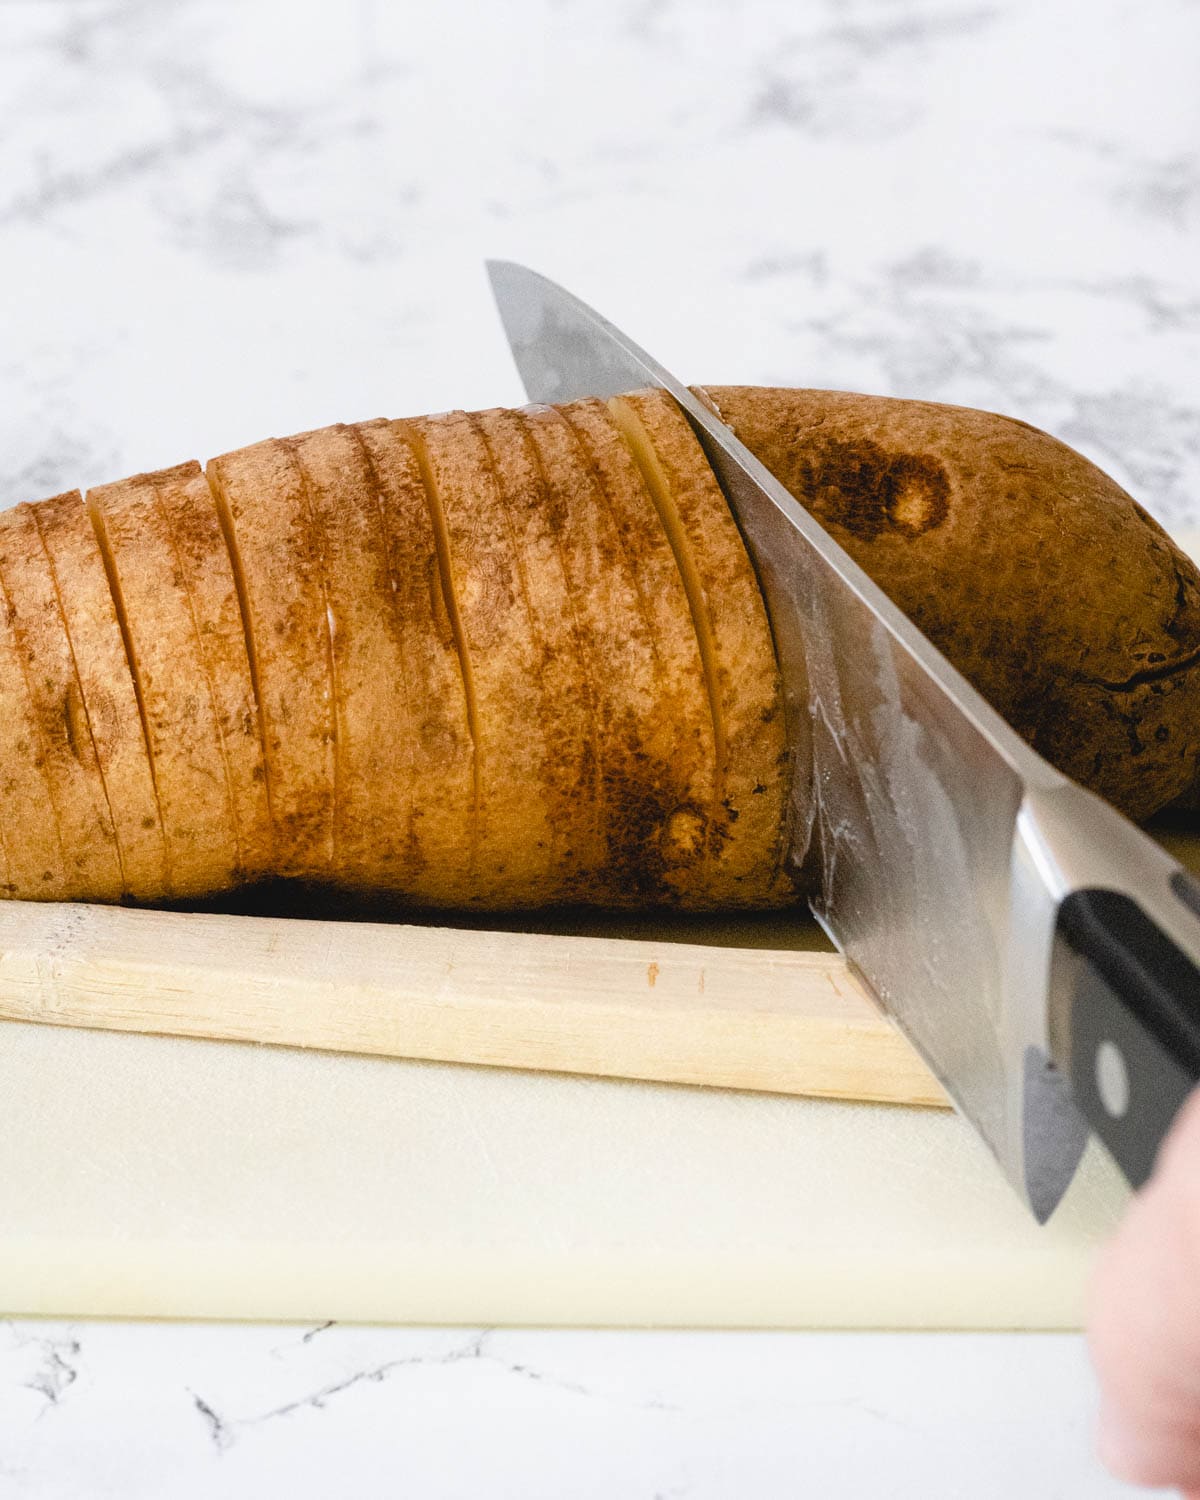 Slicing a potato in ¼-thick slices, using a spoon to stop the knife from cutting all the way through.